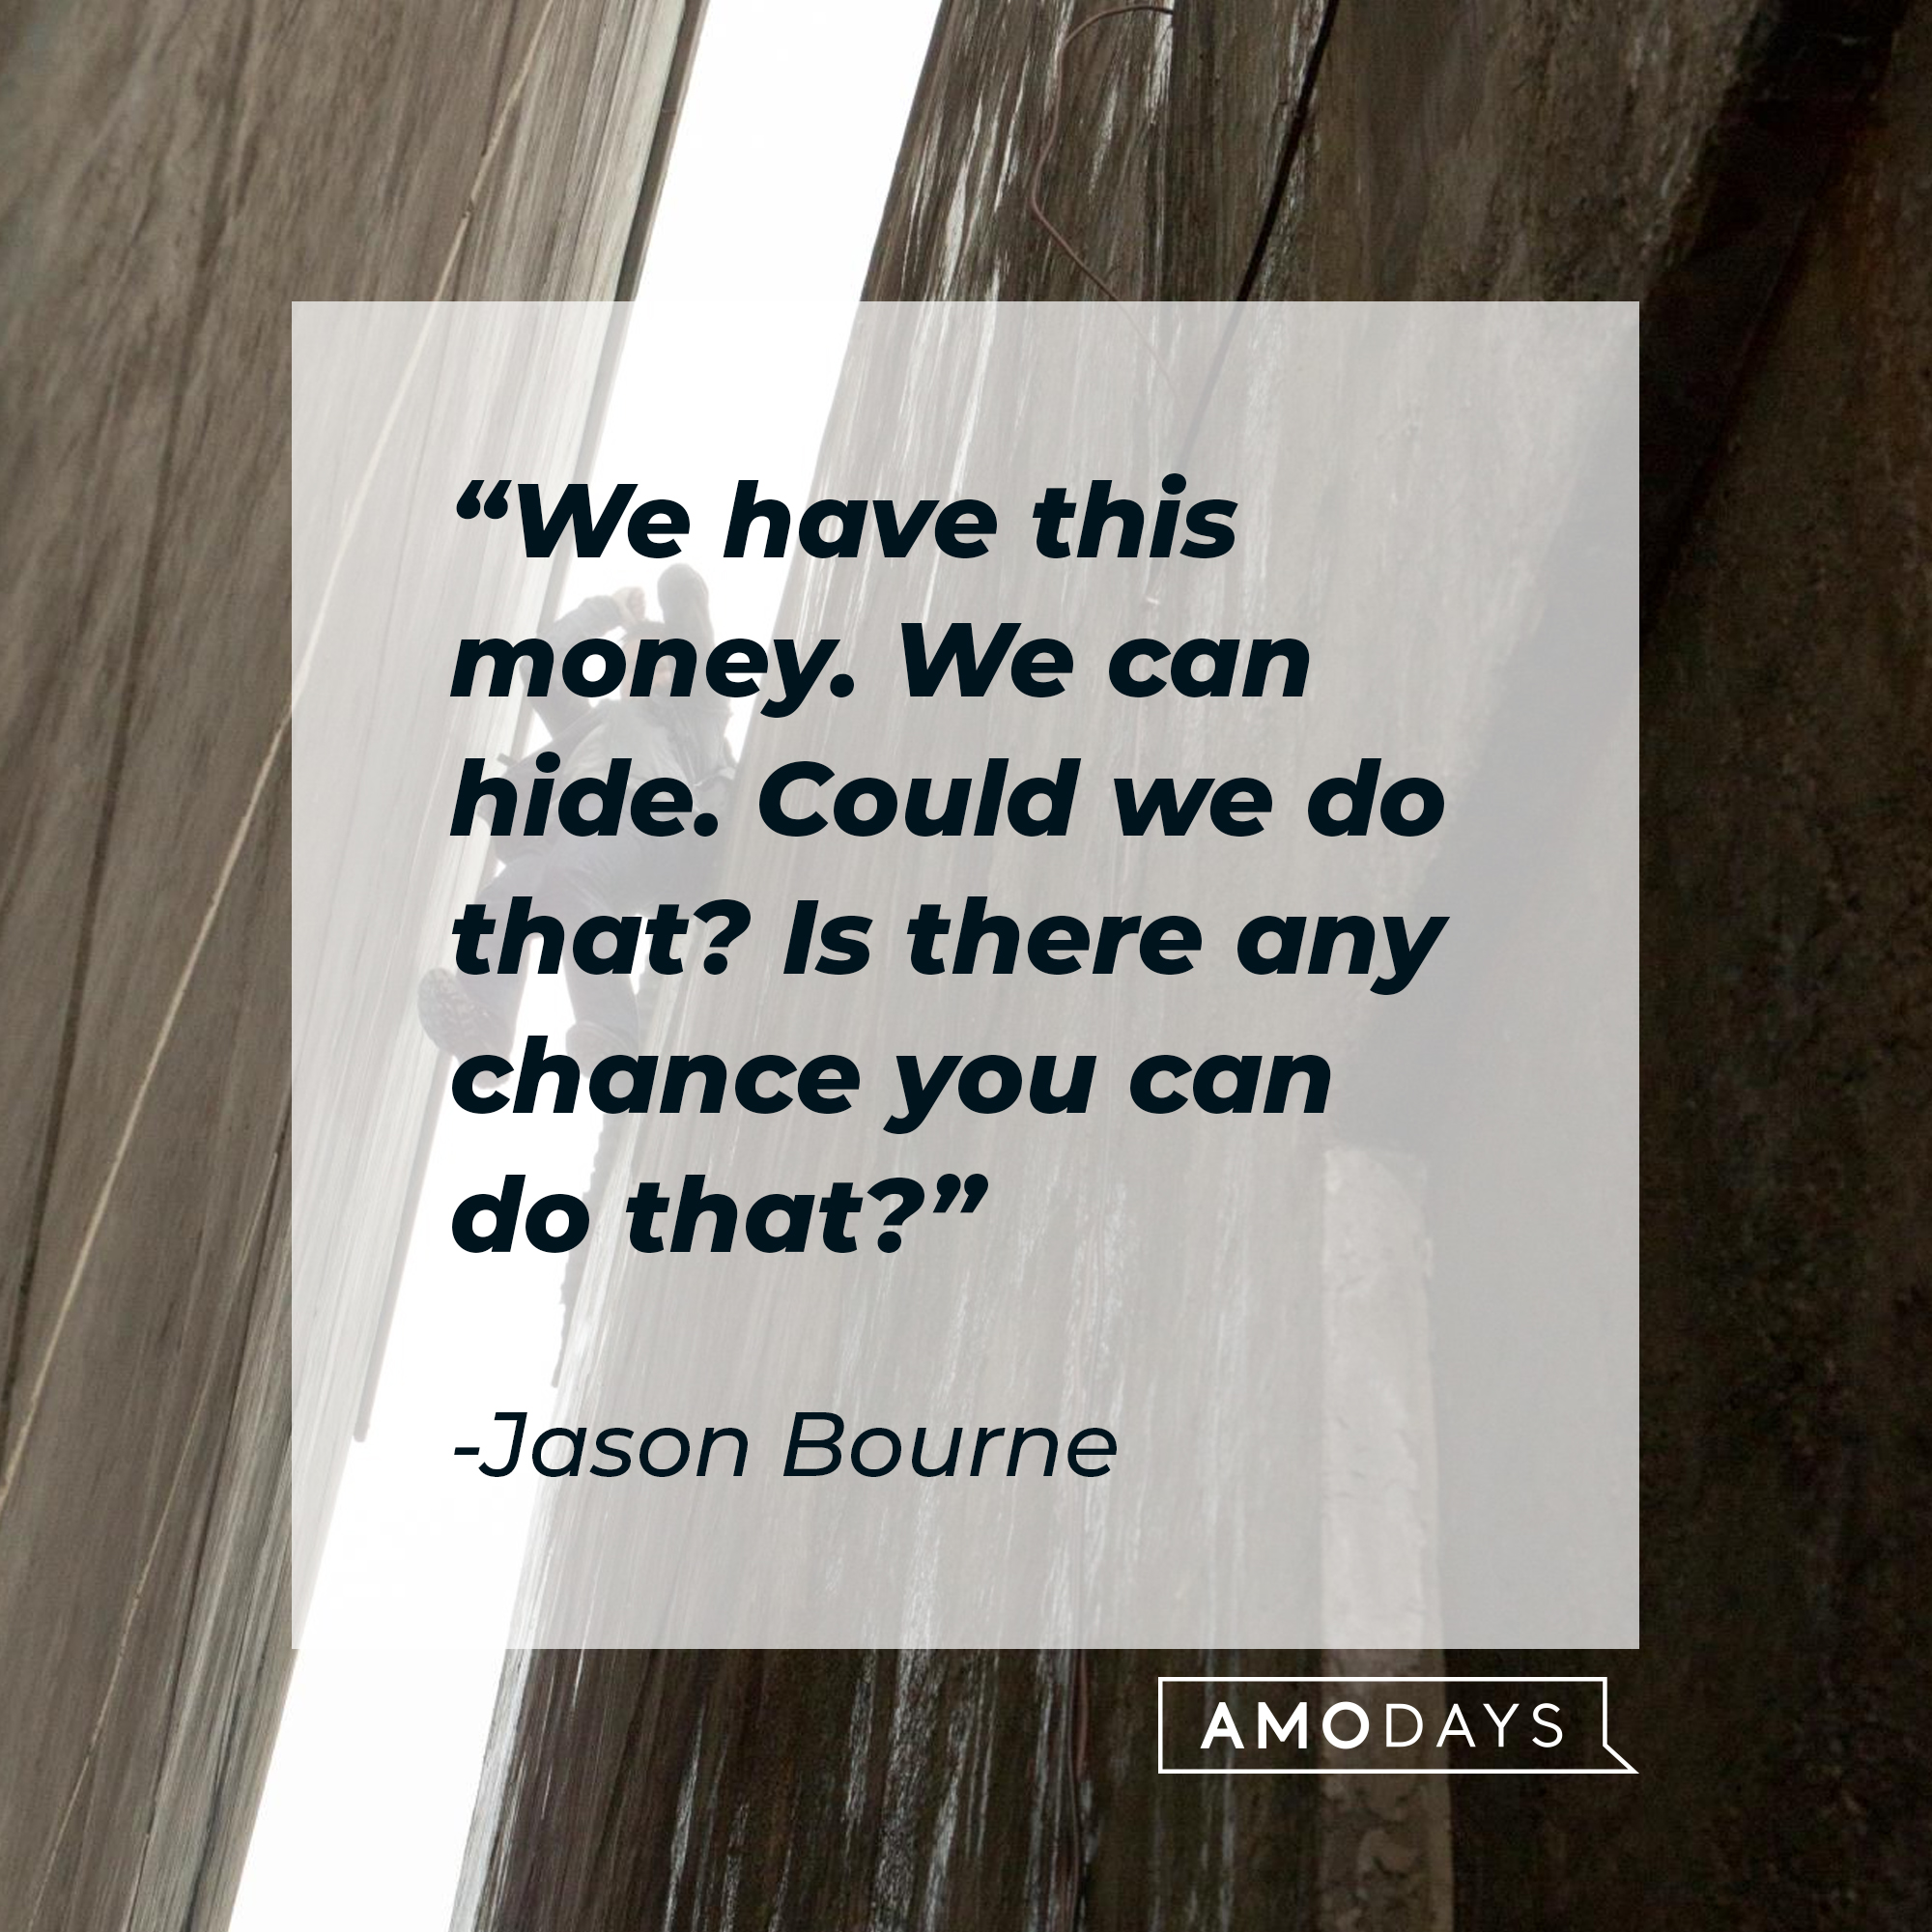 Jason Bourne's quote: "We have this money. We can hide. Could we do that? Is there any chance you can do that?" | Source: facebook.com/TheBourneSeries